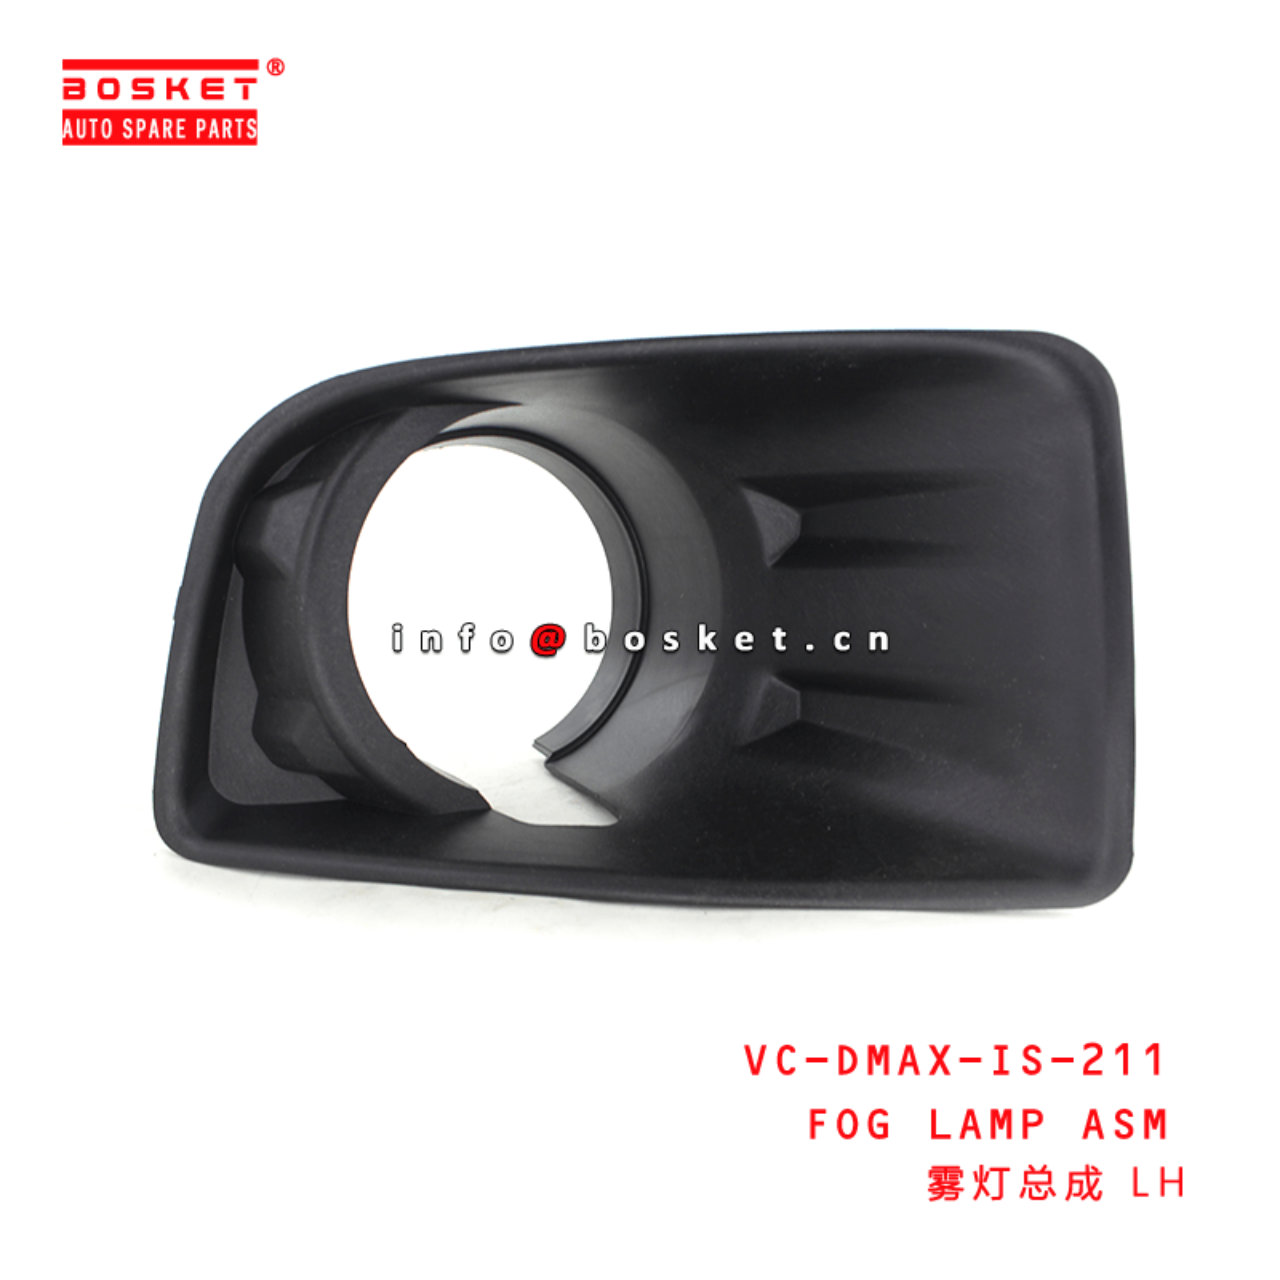 VC-DMAX-IS-211 VCDMAXIS211 FOG LAMP ASSEMBLY LH Suitable FOR ISUZU D-MAX 2013-2015